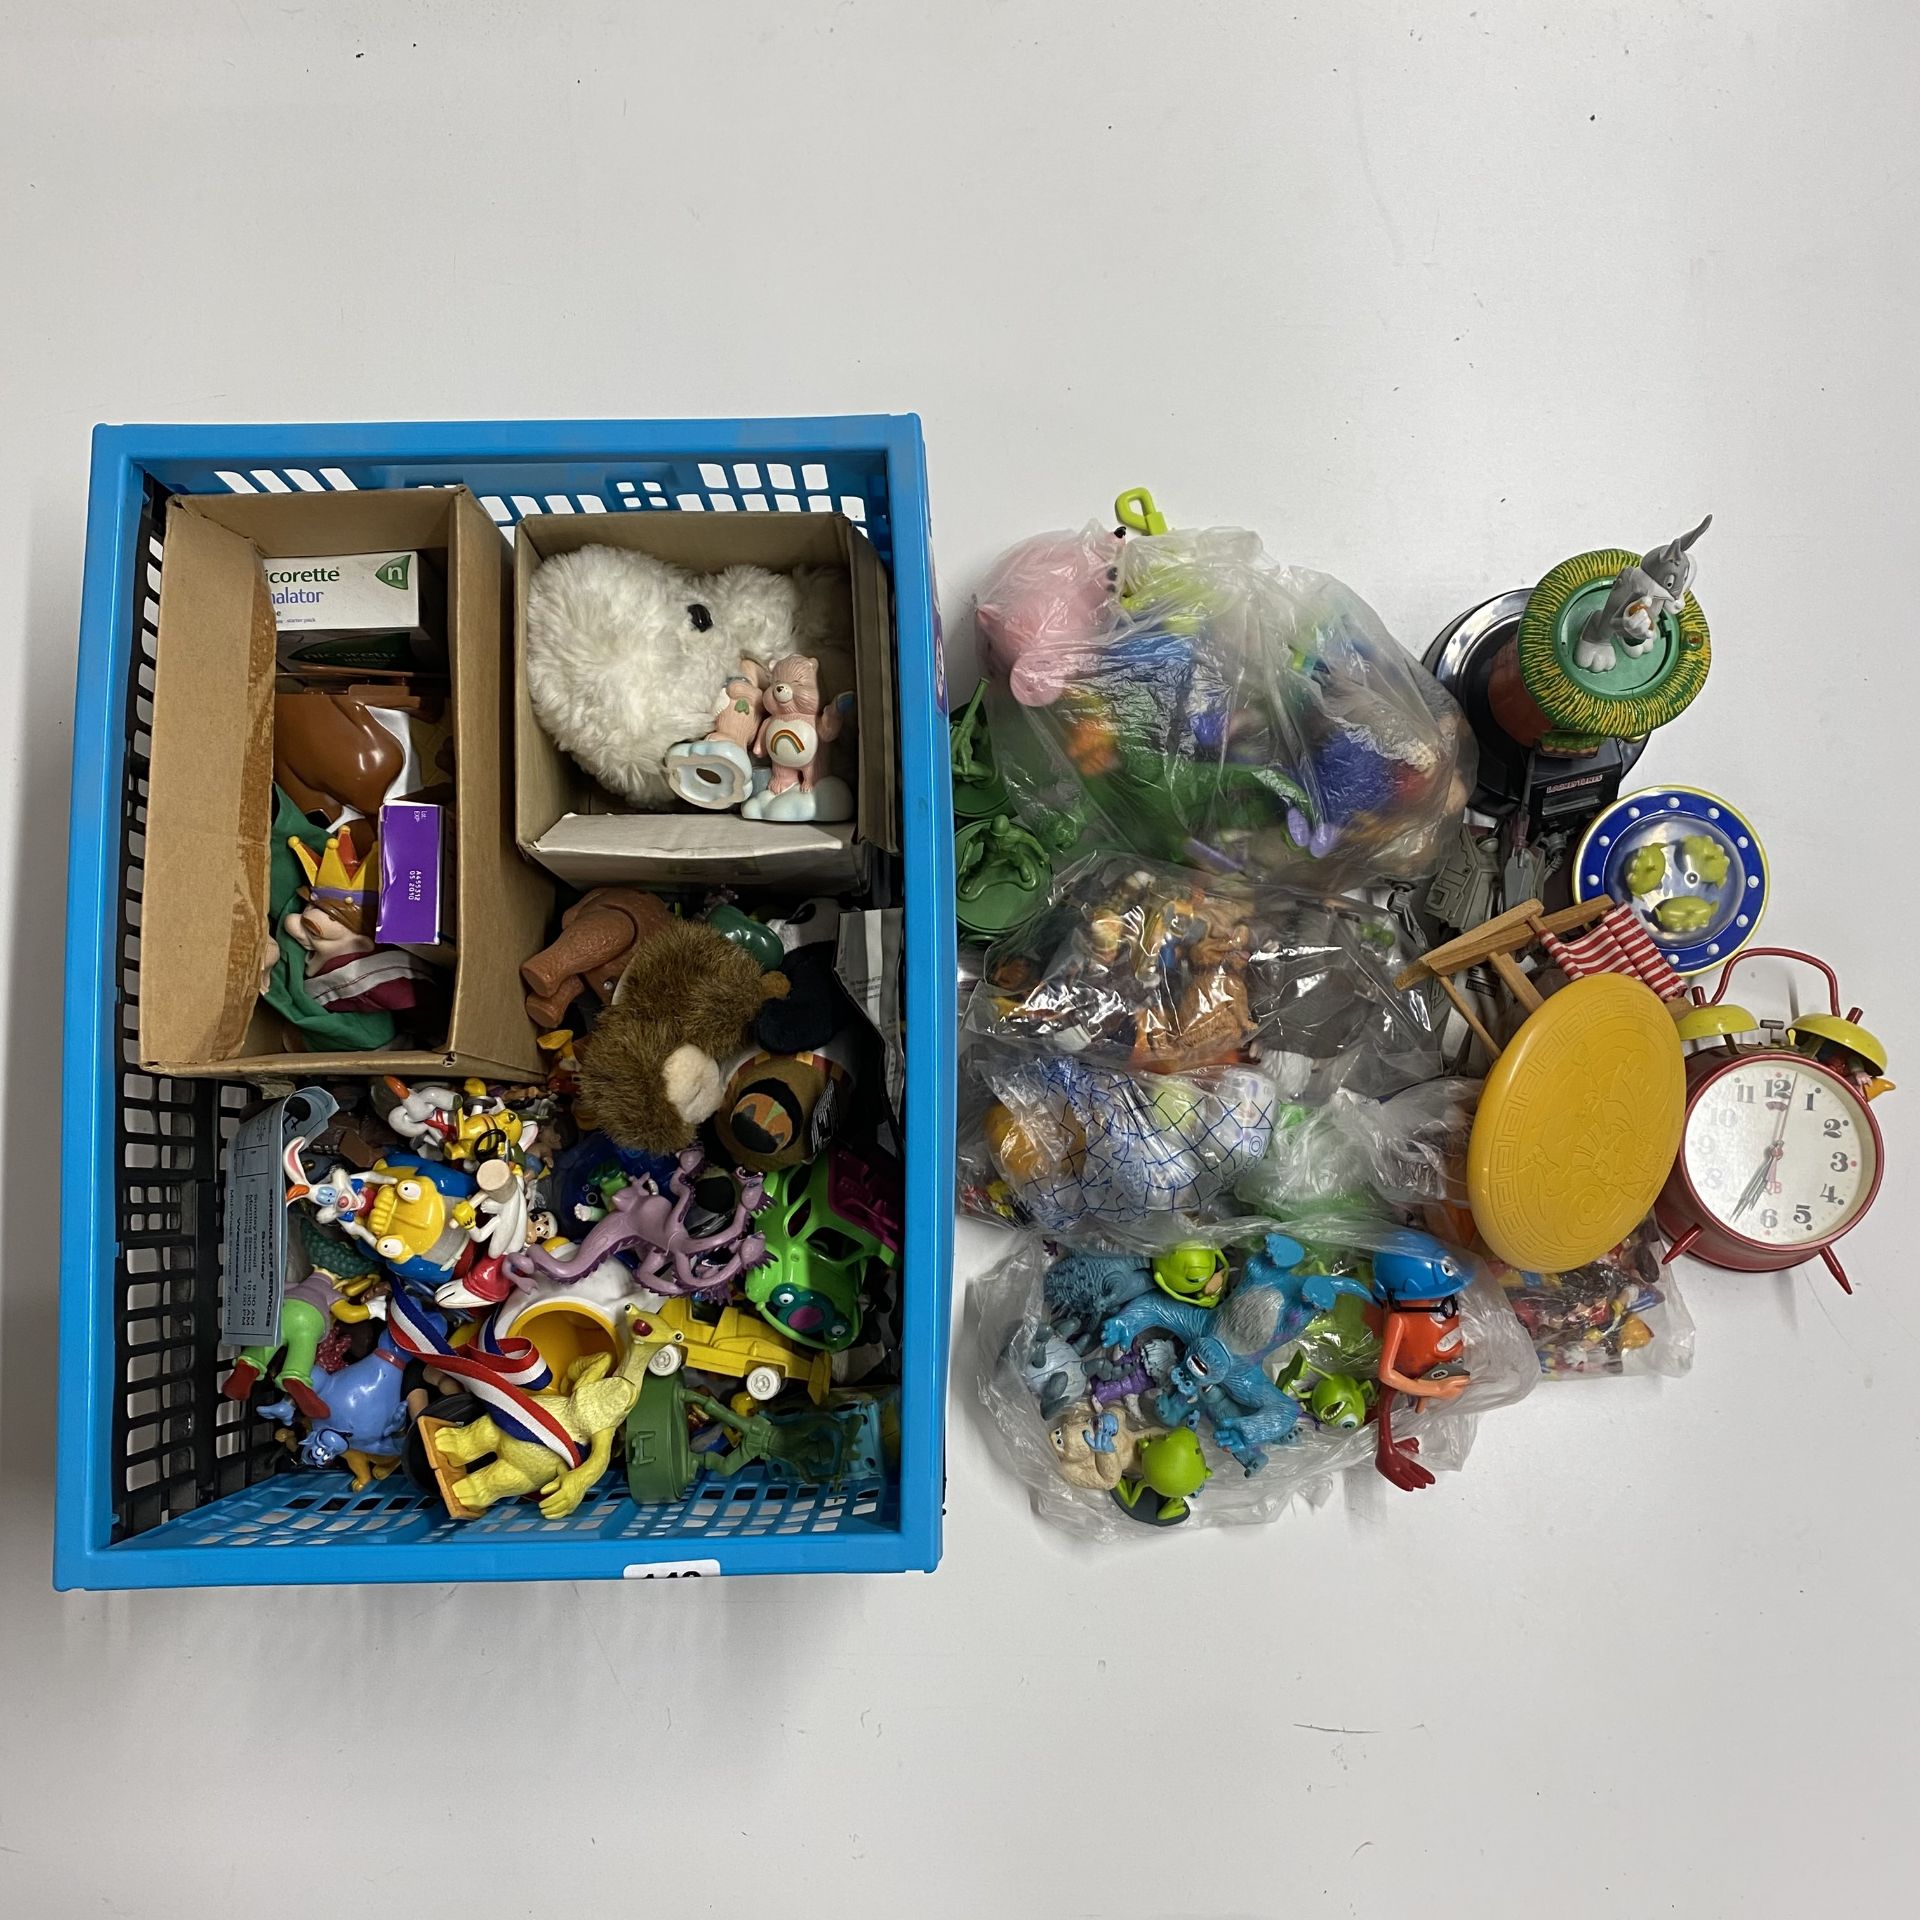 A large mixed box of various toys.